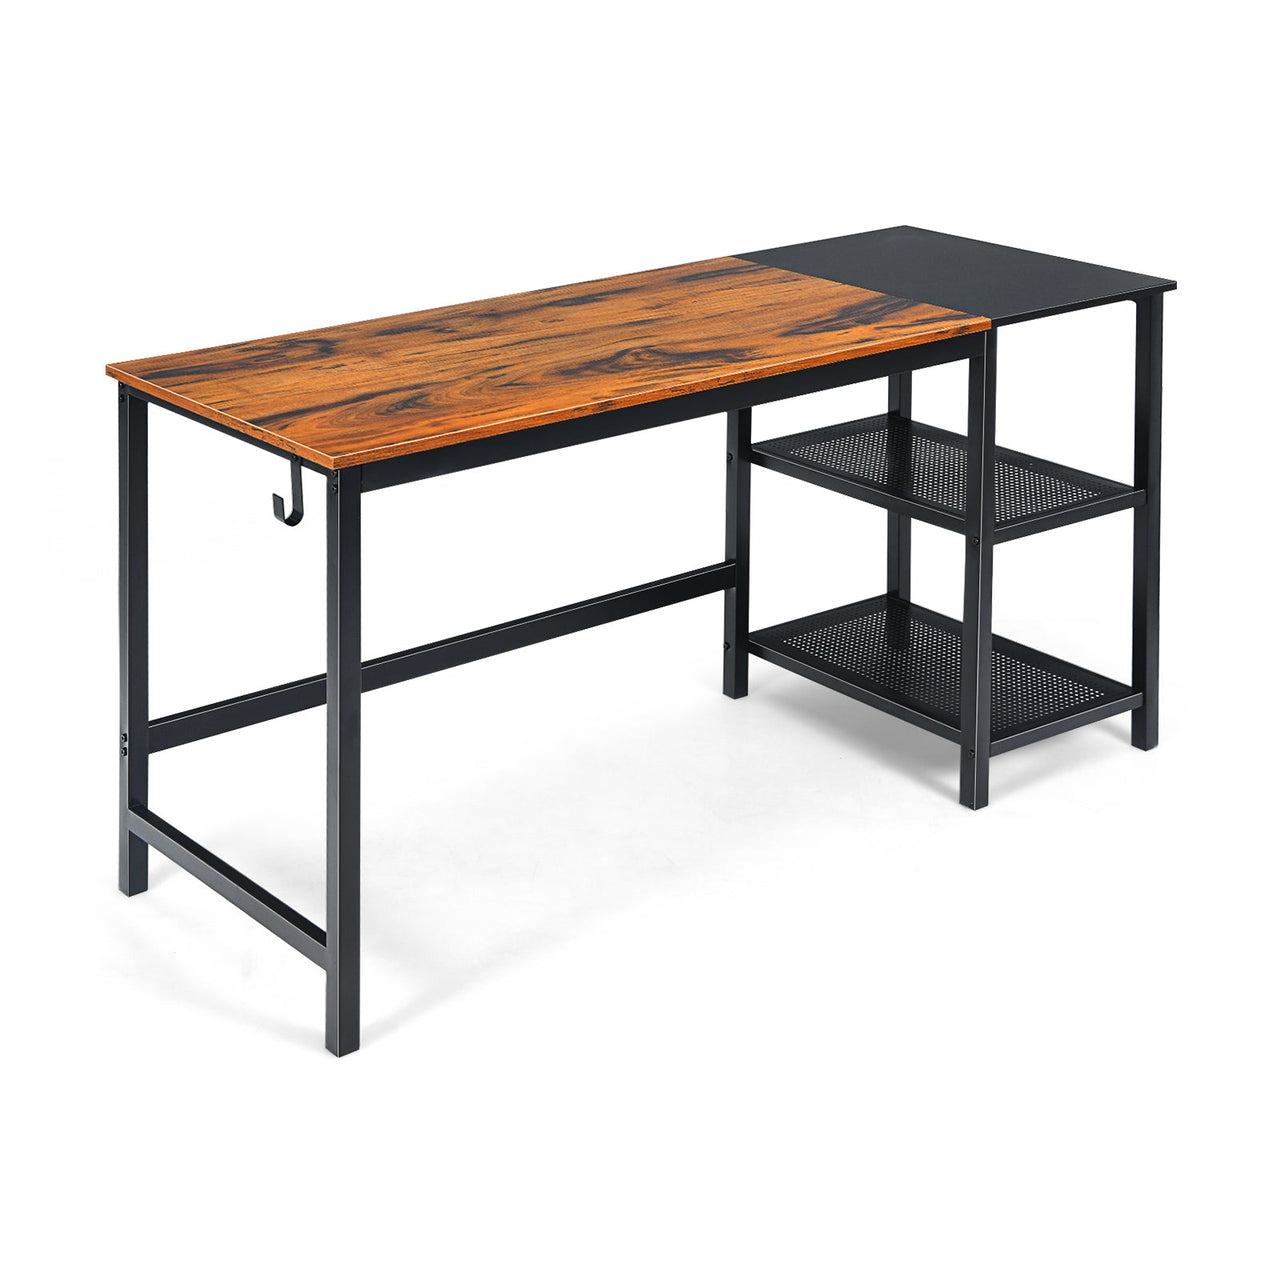 59 Inch Industrial Computer Desk with 2 Tier Storage Shelves for Home Office